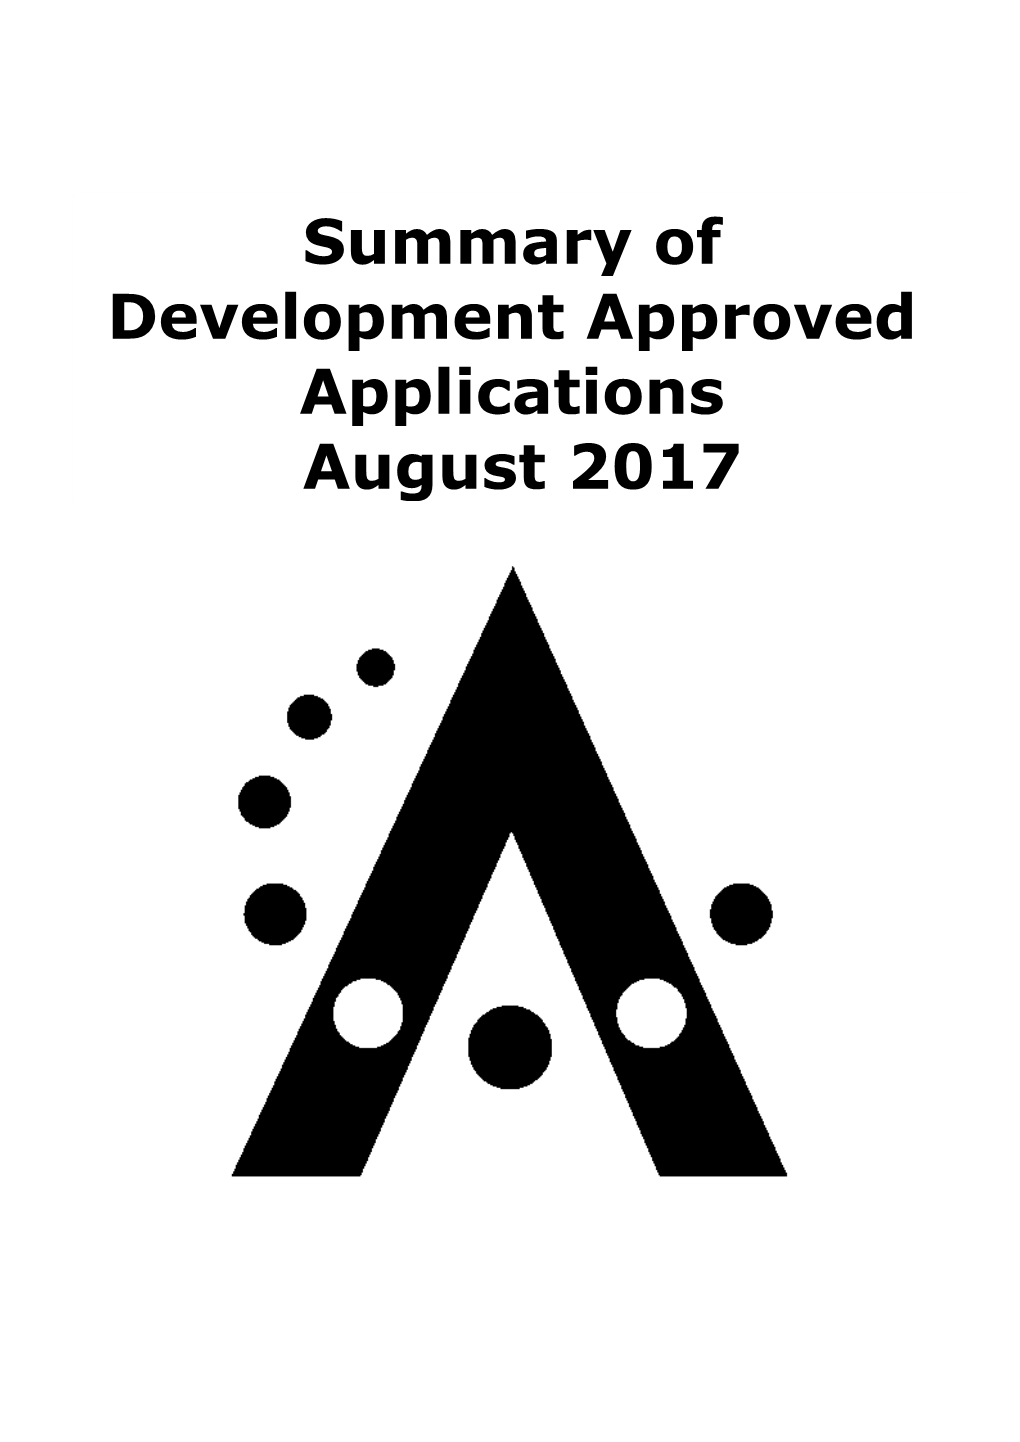 Summary of Development Approved Applications August 2017 Summary of Development Approved Applications August 2017